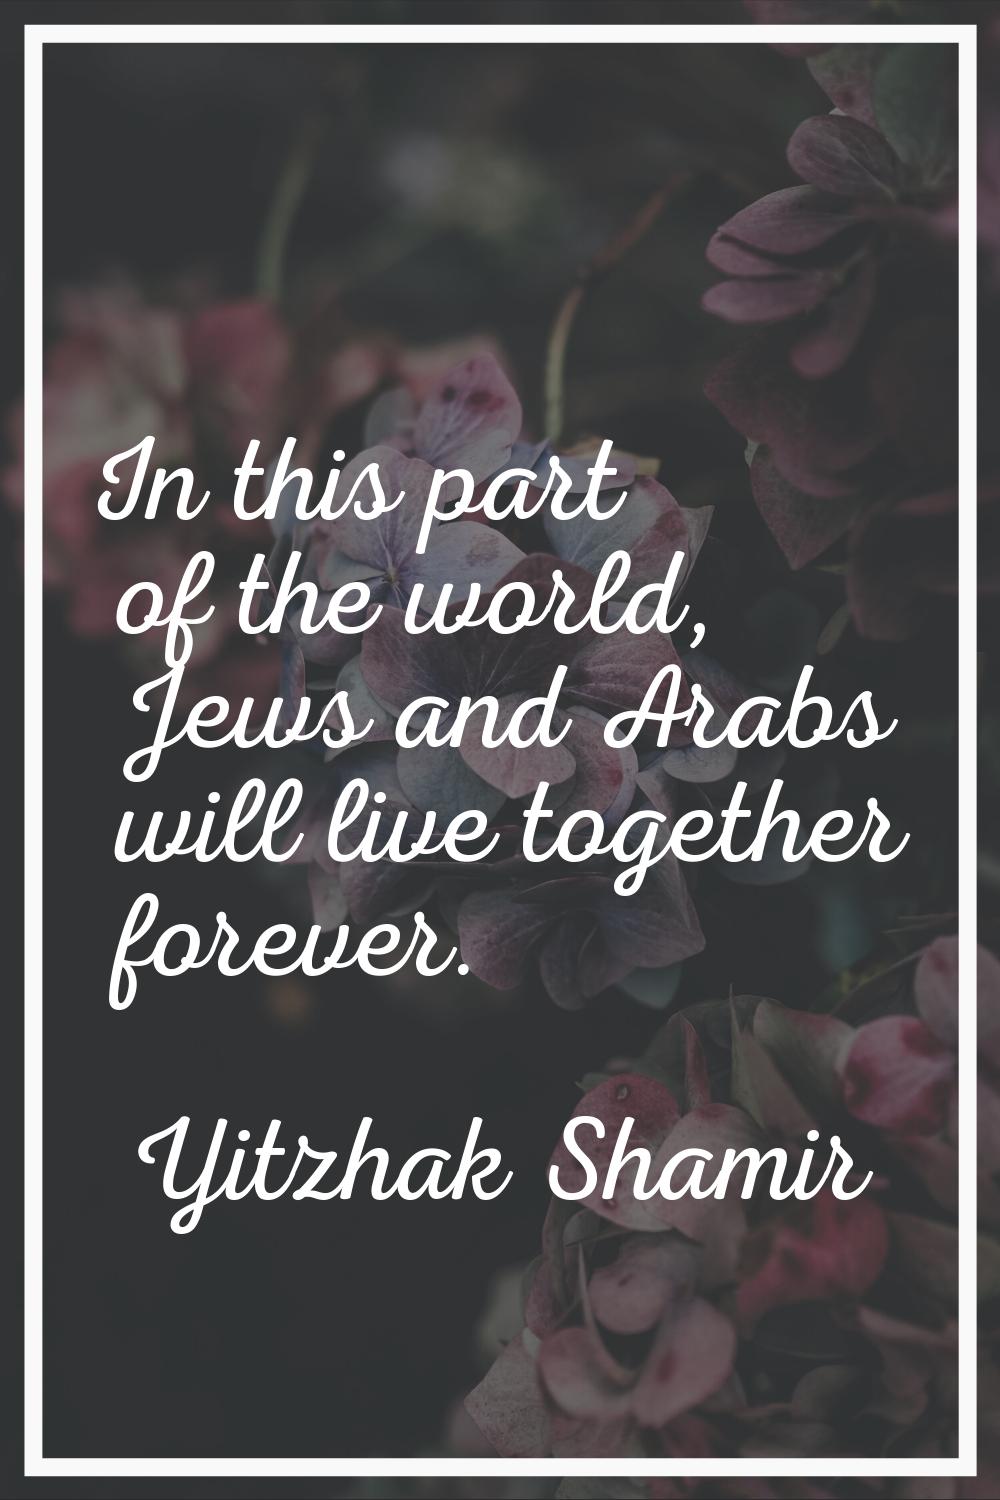 In this part of the world, Jews and Arabs will live together forever.